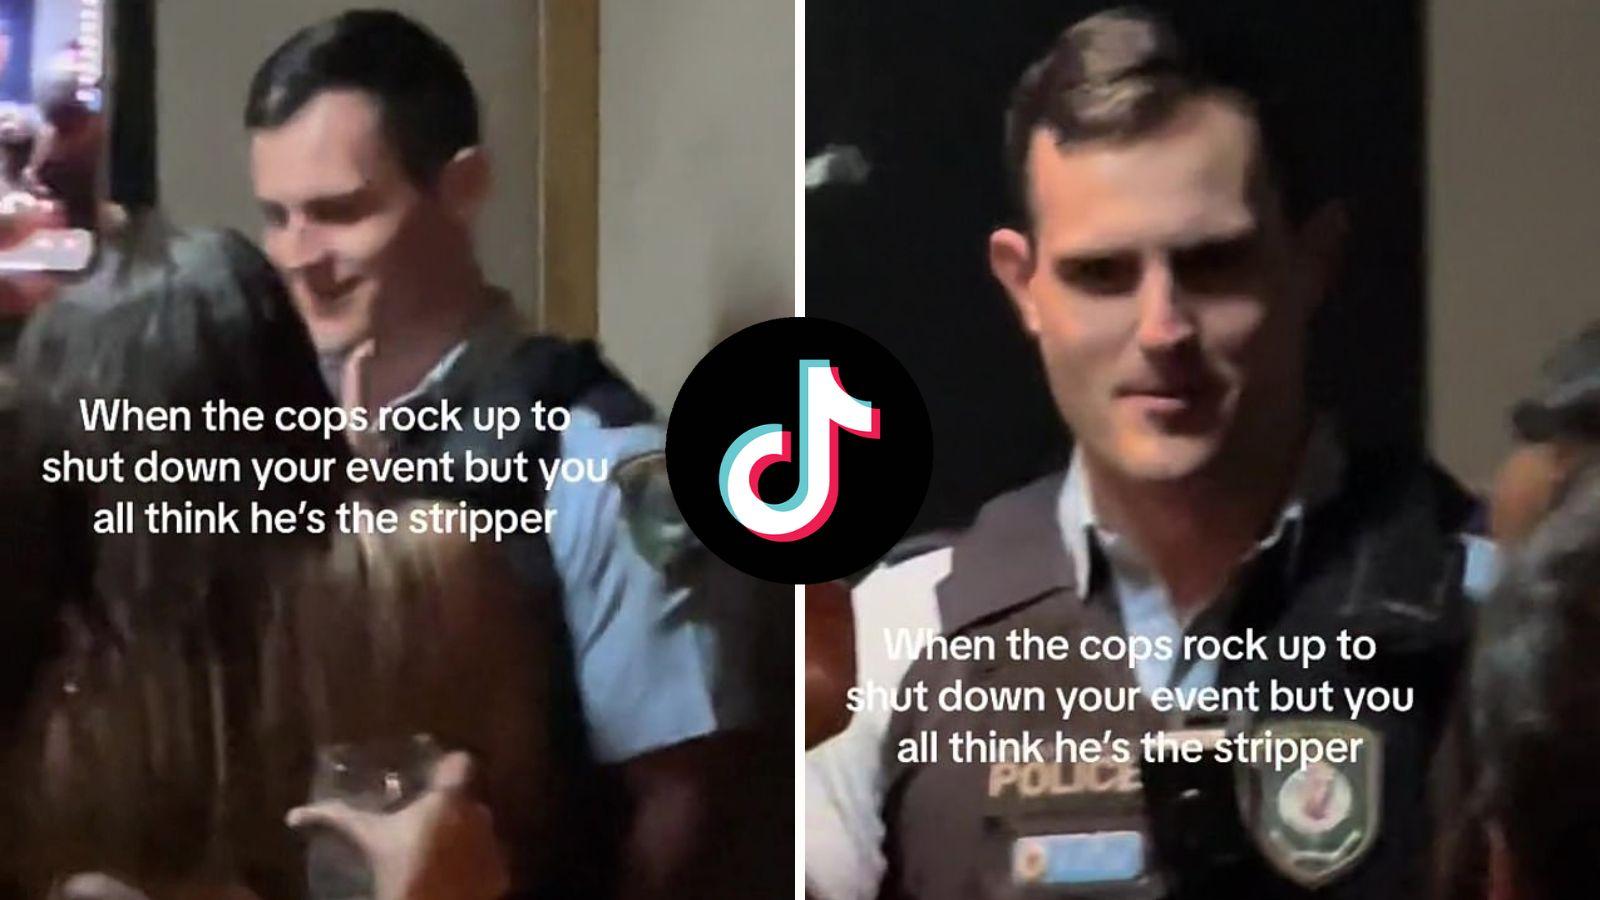 Cop mistaken for stripper after breaking up rowdy house party